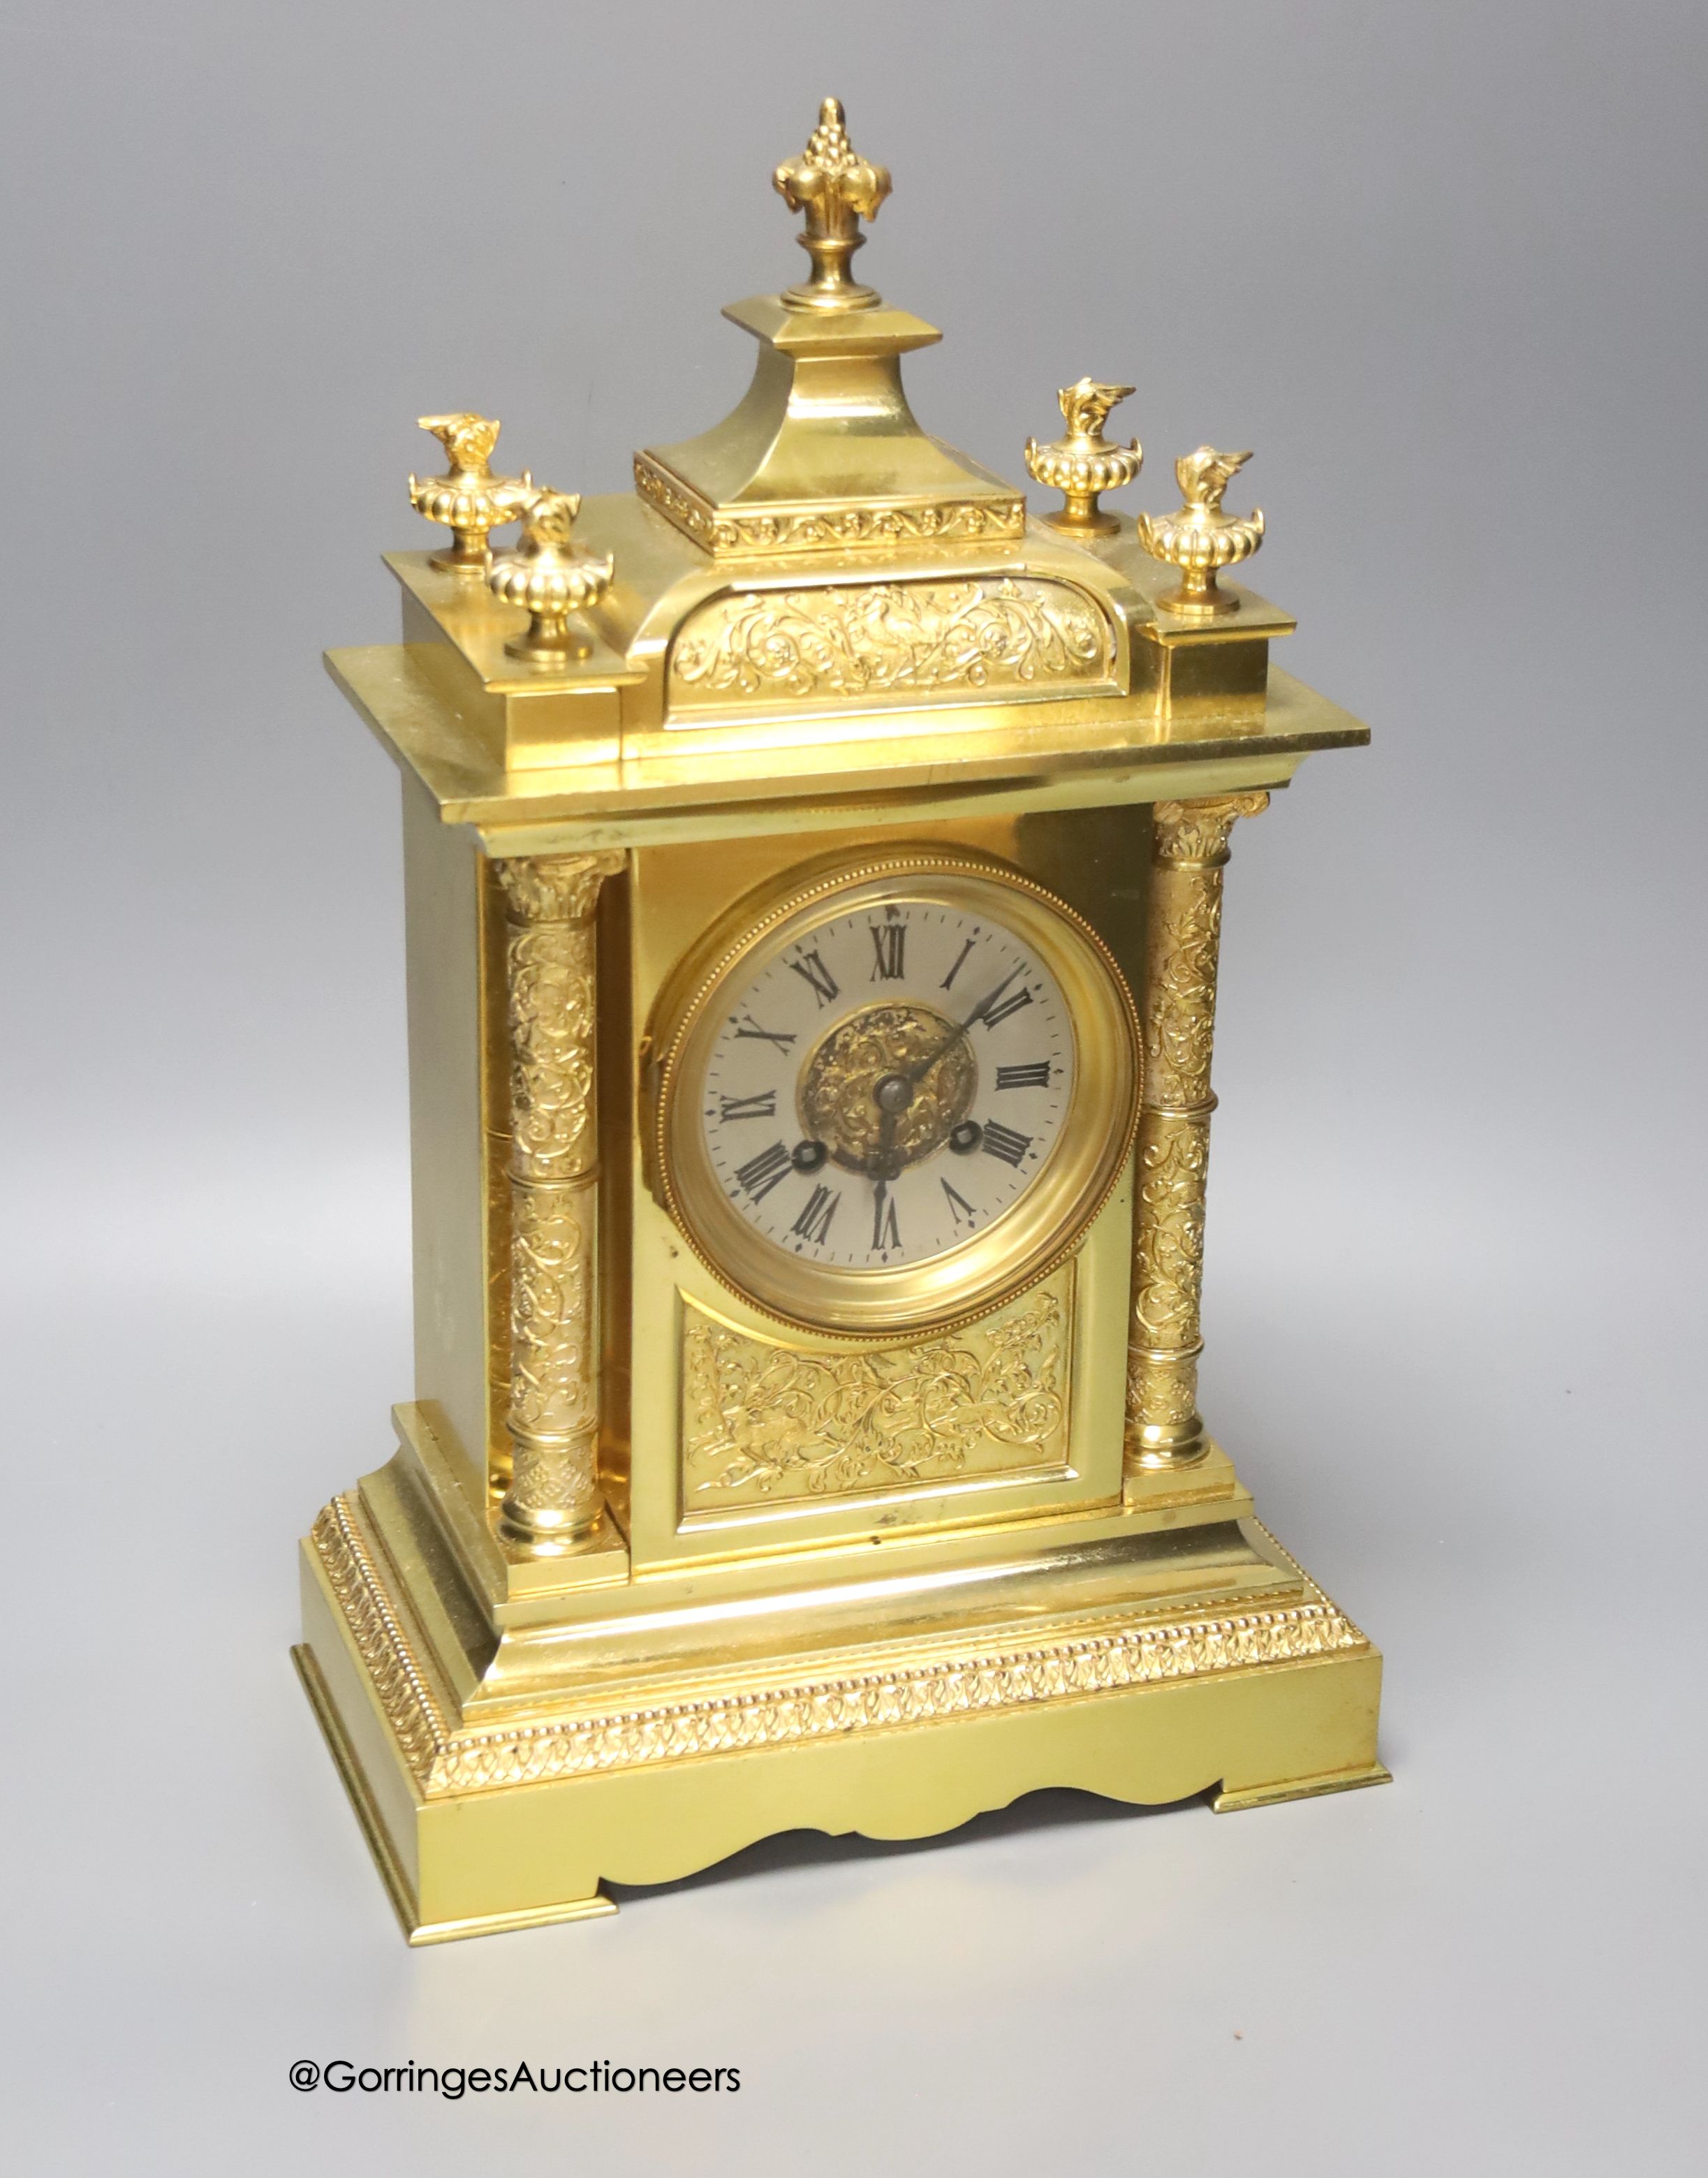 A Victorian architectural ormolu mantel clock, c.1860's, French gong striking movement, height 39cm